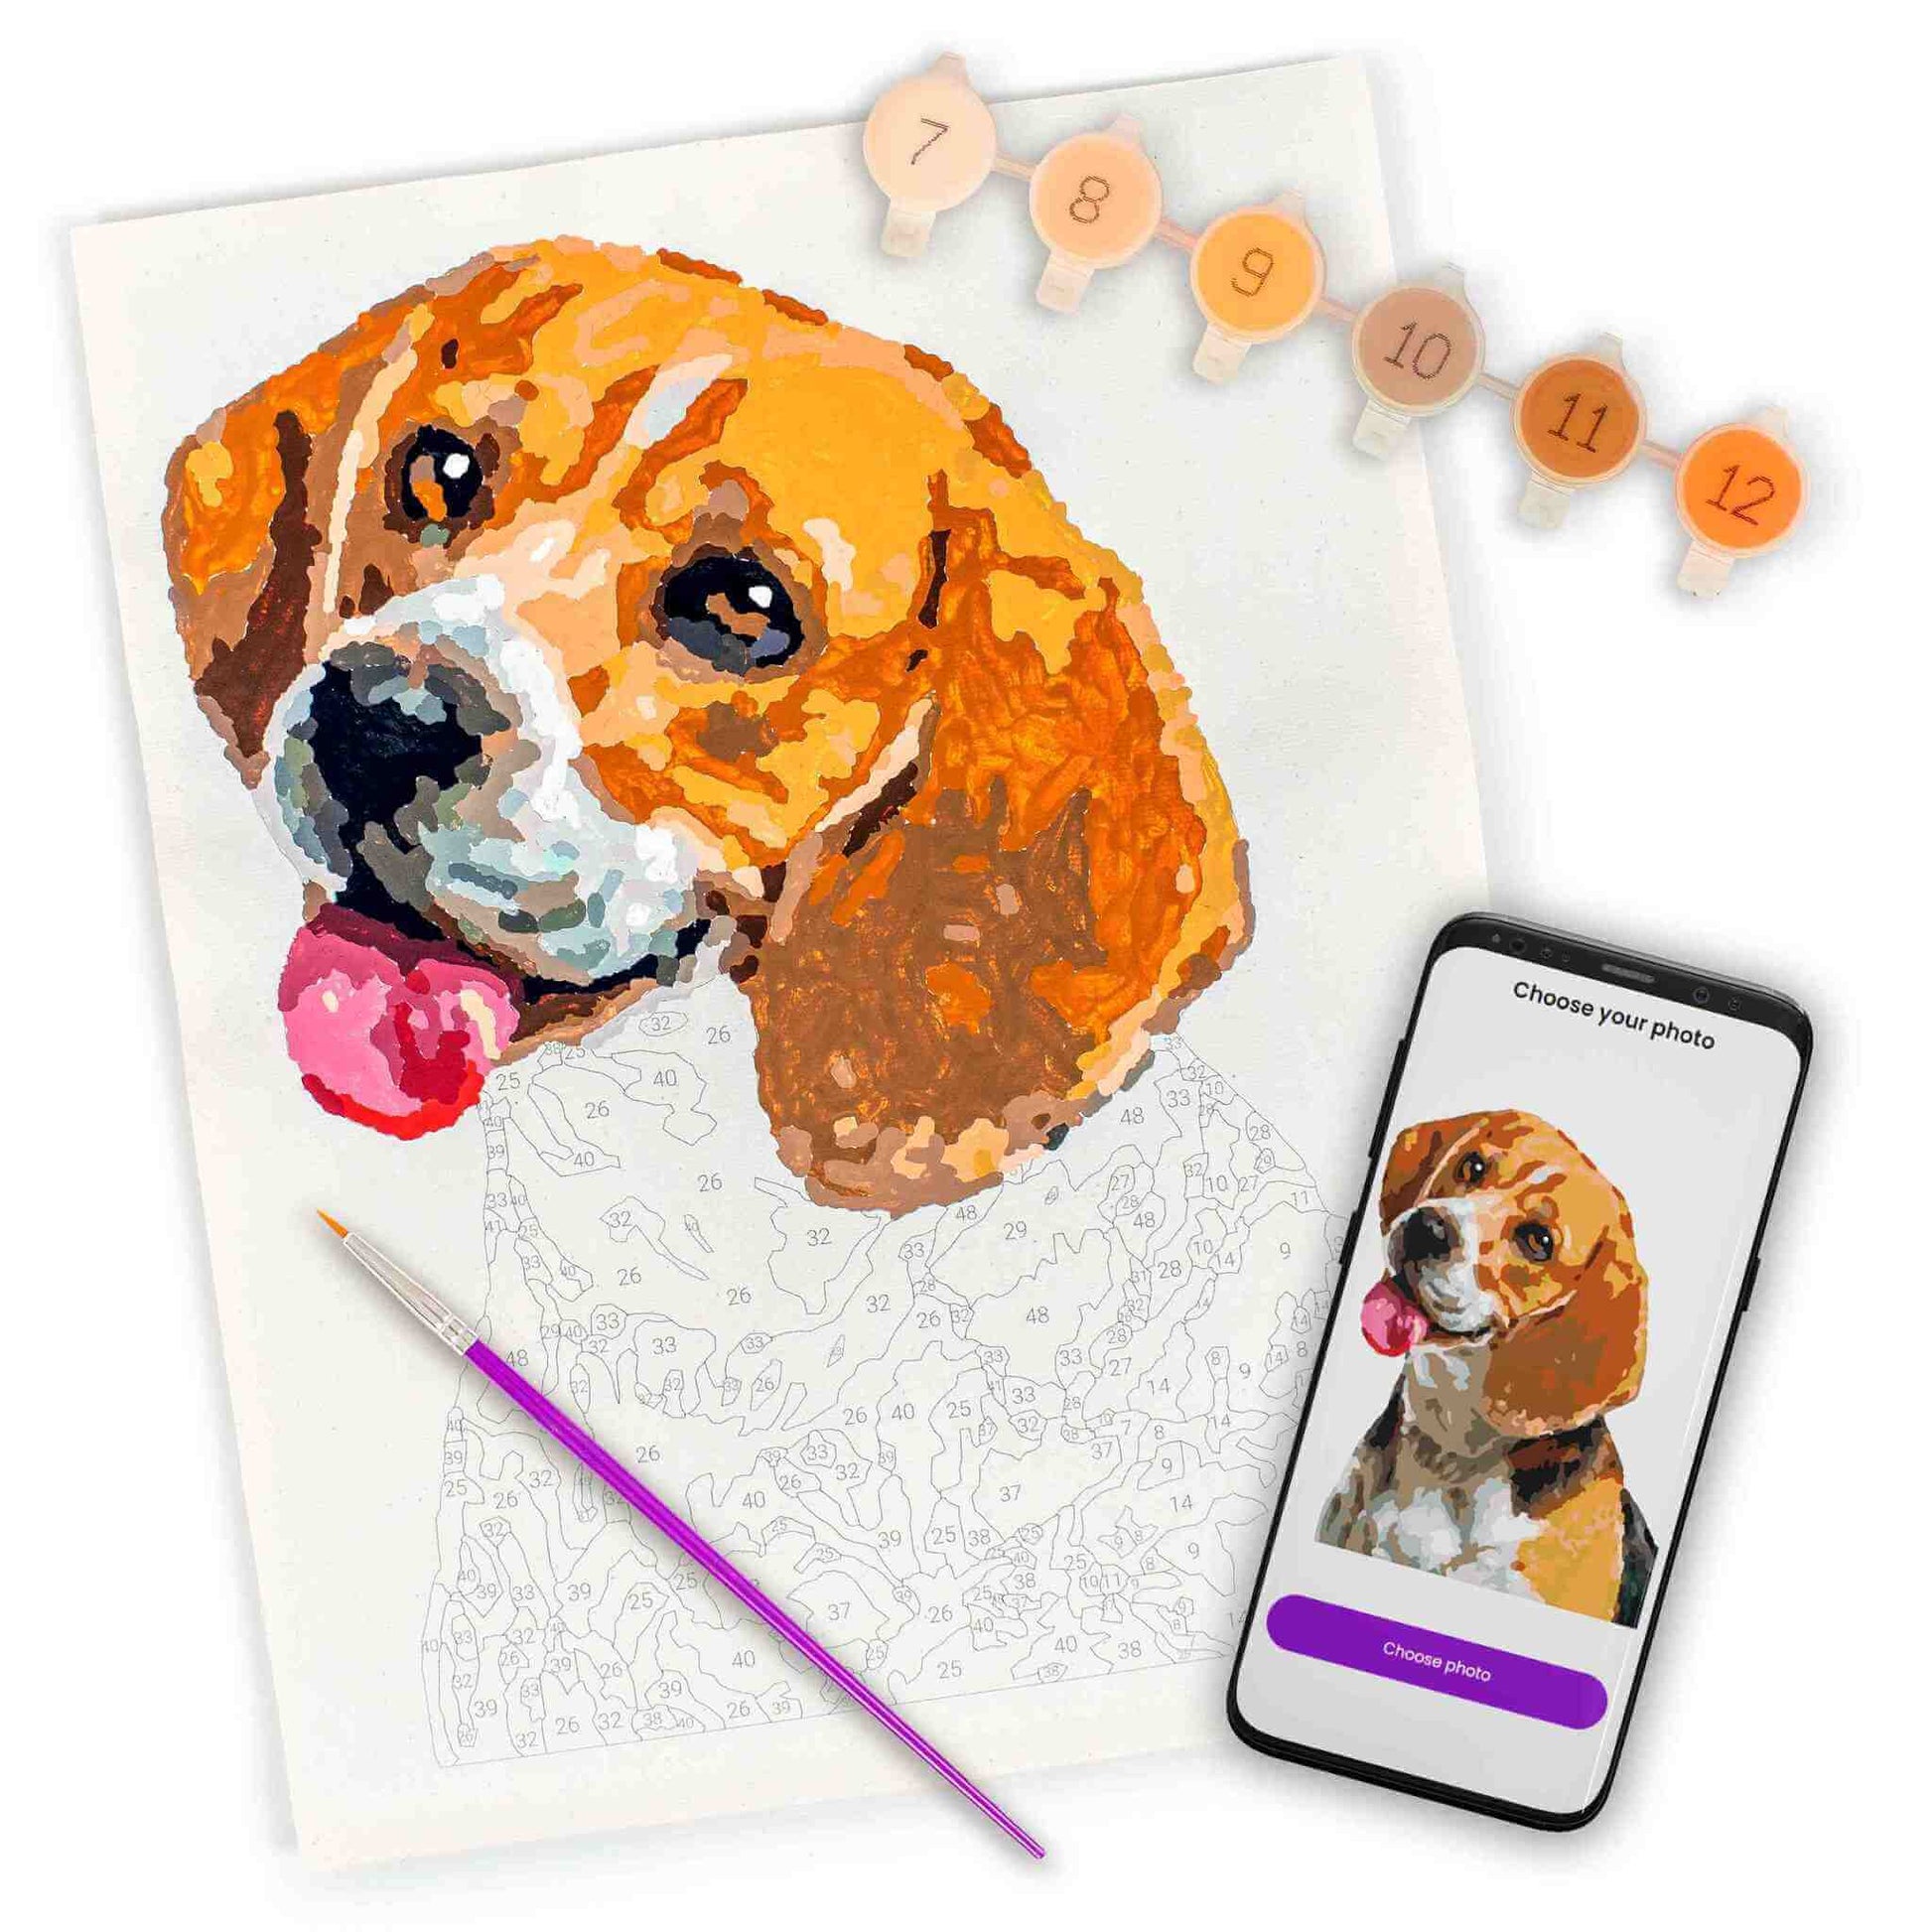 A partially painted number-guided canvas of a dog alongside paint pots labeled with numbers 7 through 12. A purple paintbrush rests on the canvas, and a smartphone shows the reference painting preview of the dog with a 'Choose photo' button.